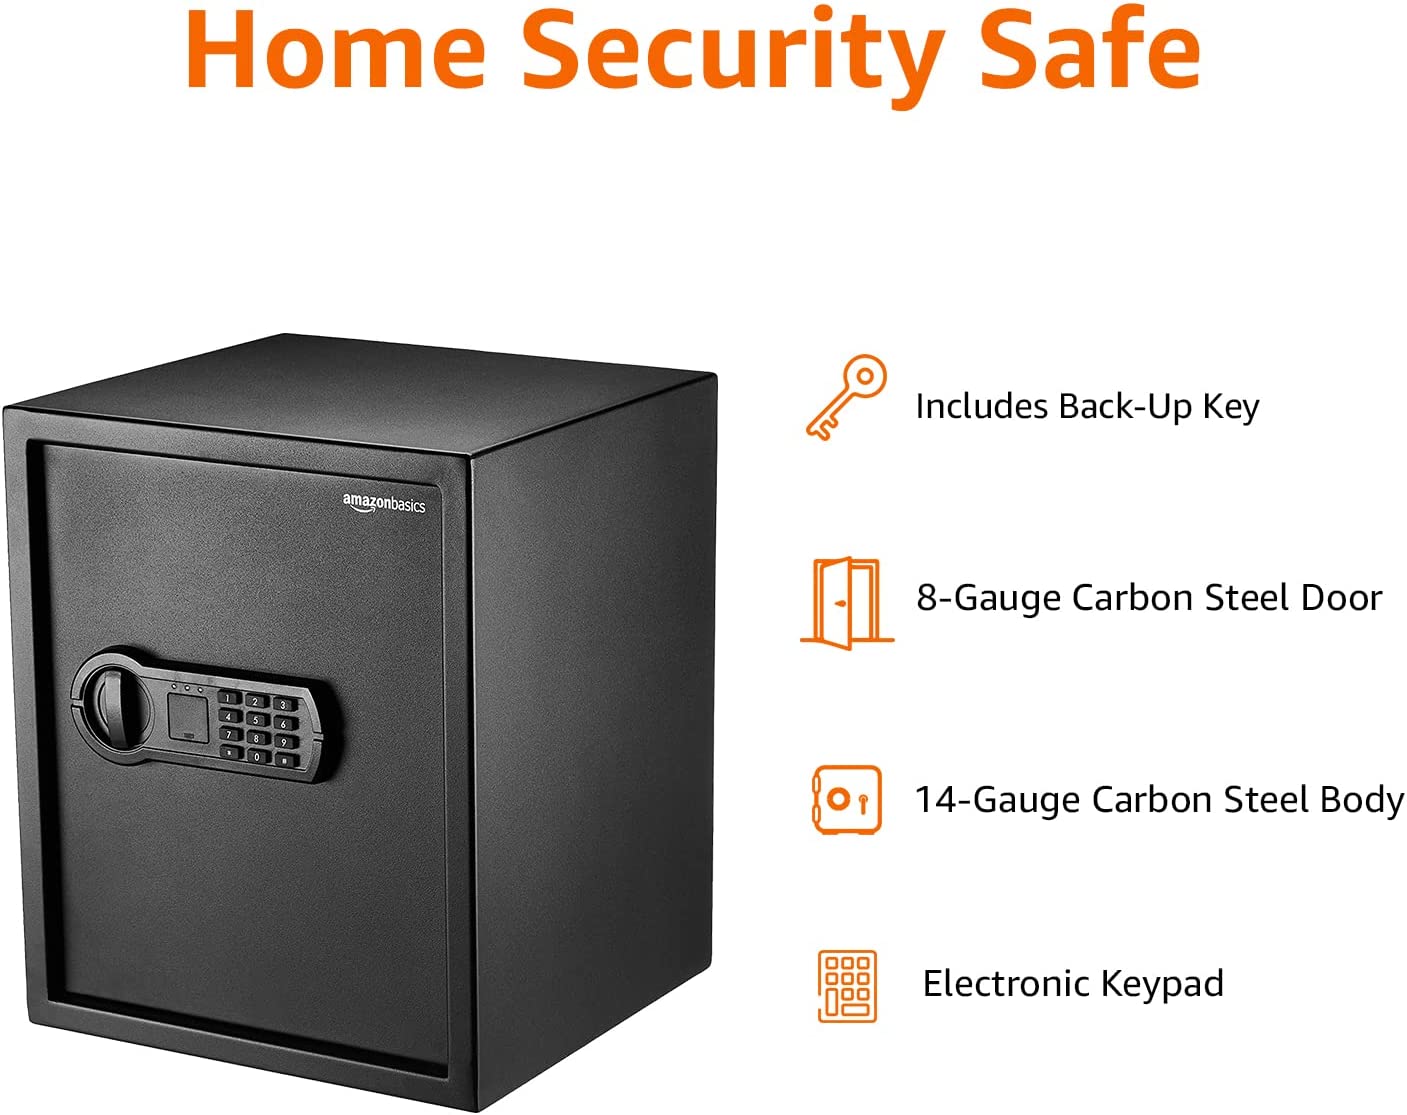 Amazon Basics Steel Home Security Safe with Programmable Keypad - Secure Documents, Jewelry, Valuables - 1.8 Cubic Feet, 13.8 x 13 x 19.7 Inches, Black